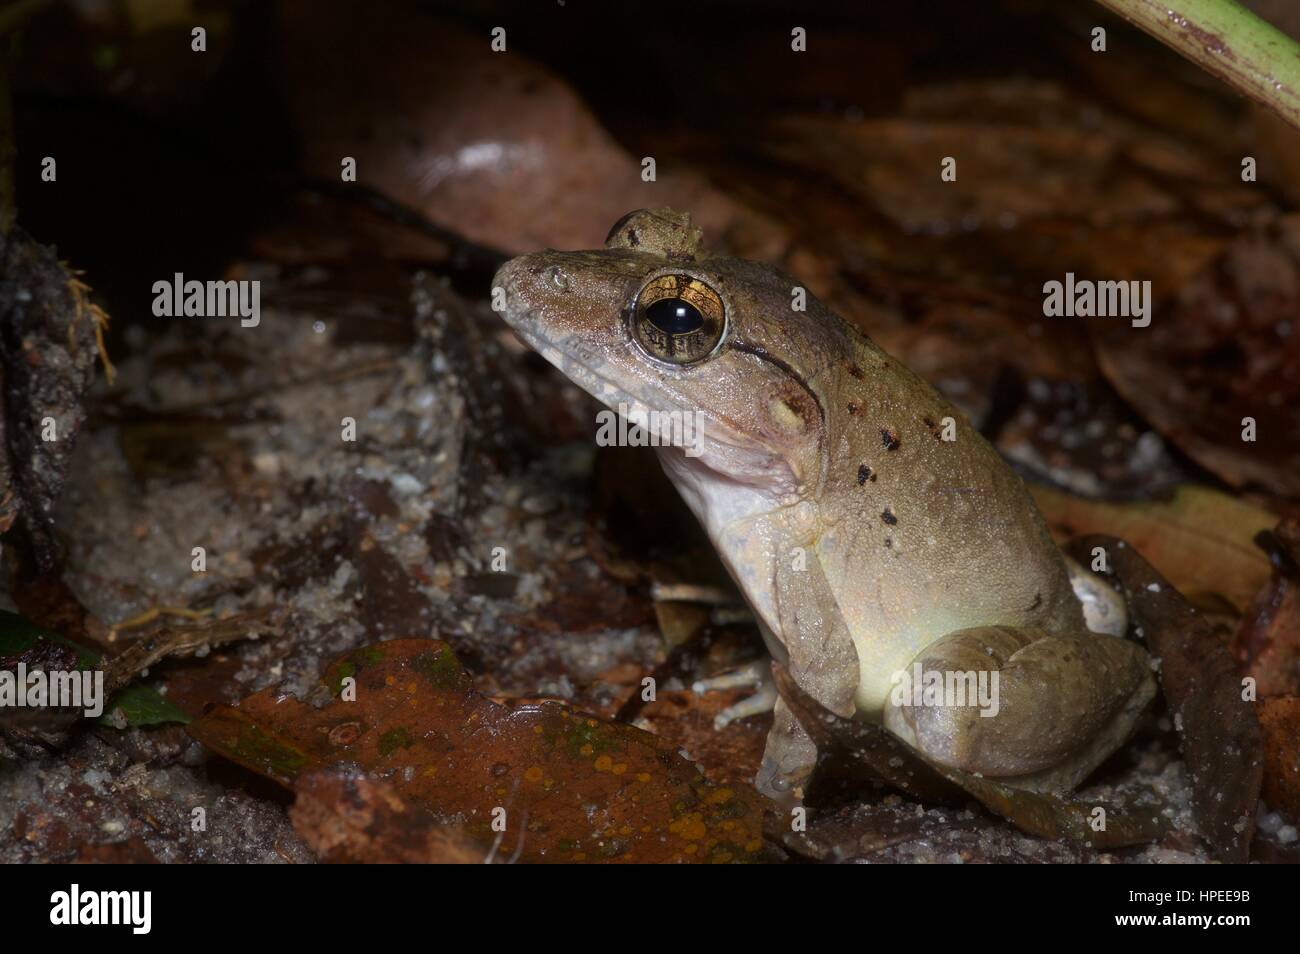 A Giant River Frog (Limnonectes blythii) in the rainforest at night in Semenyih, Selangor, Malaysia Stock Photo